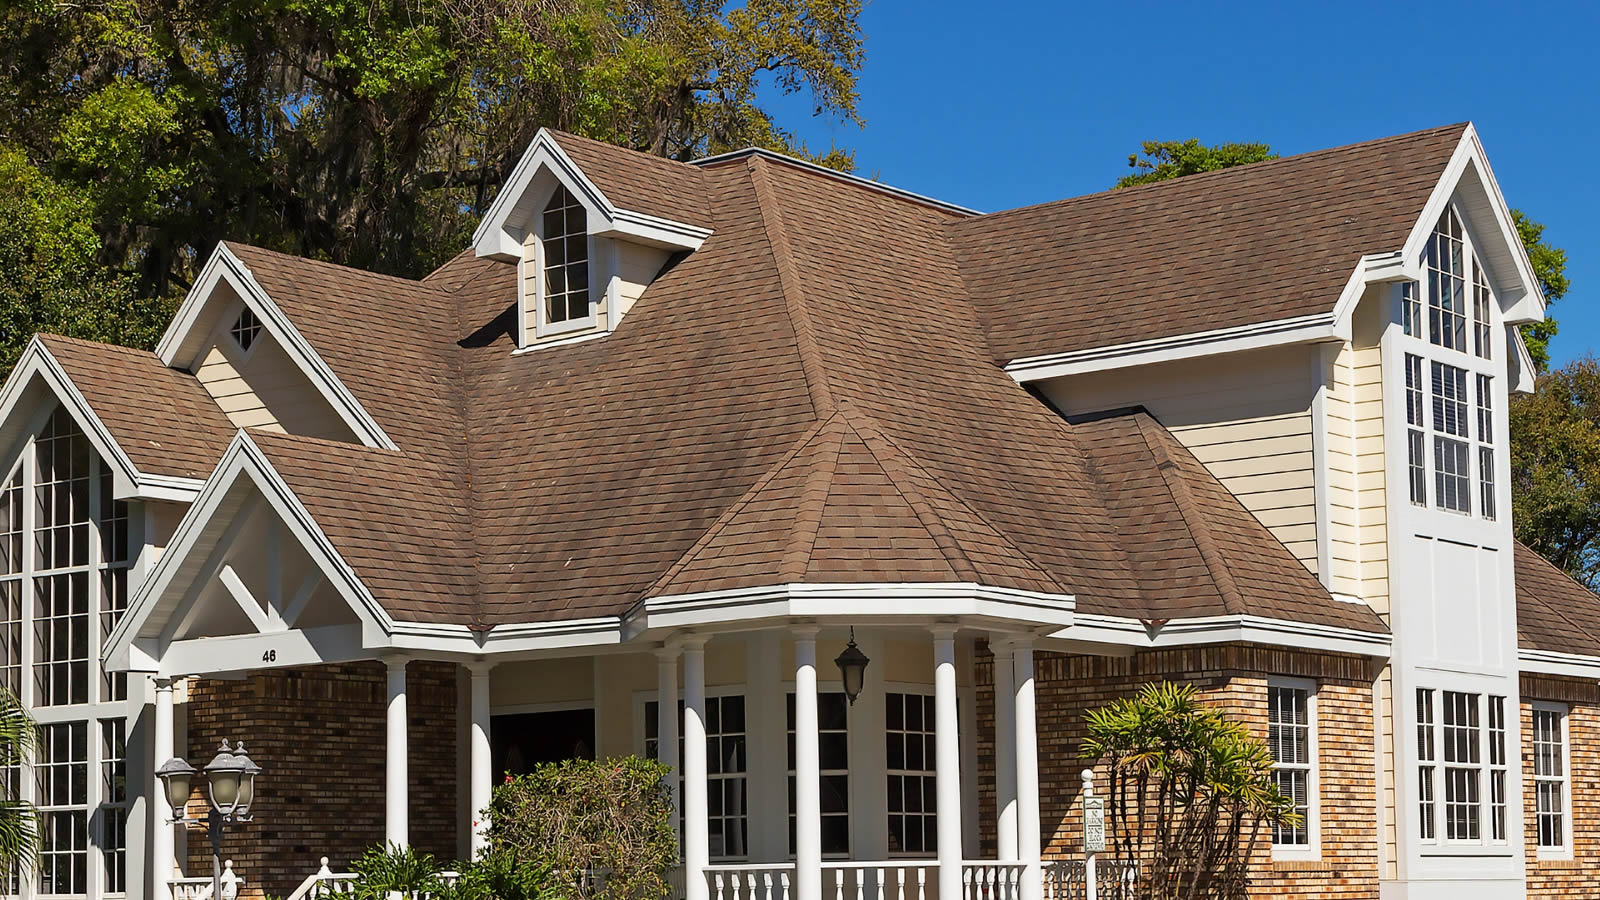 Local Chamblee Roofing Contractor 